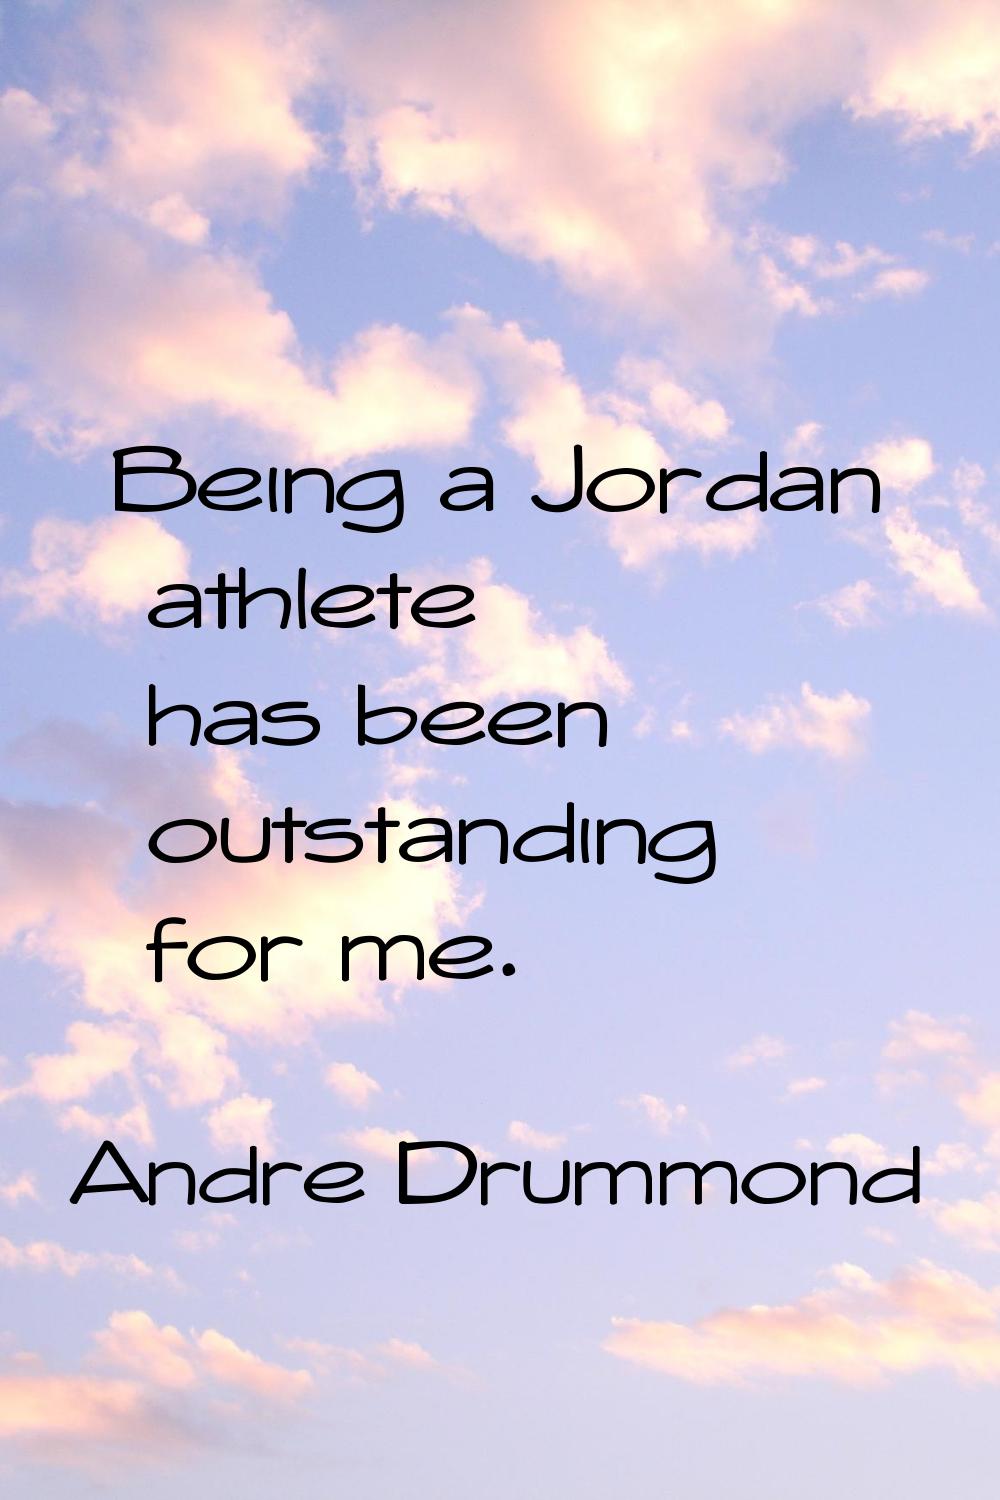 Being a Jordan athlete has been outstanding for me.